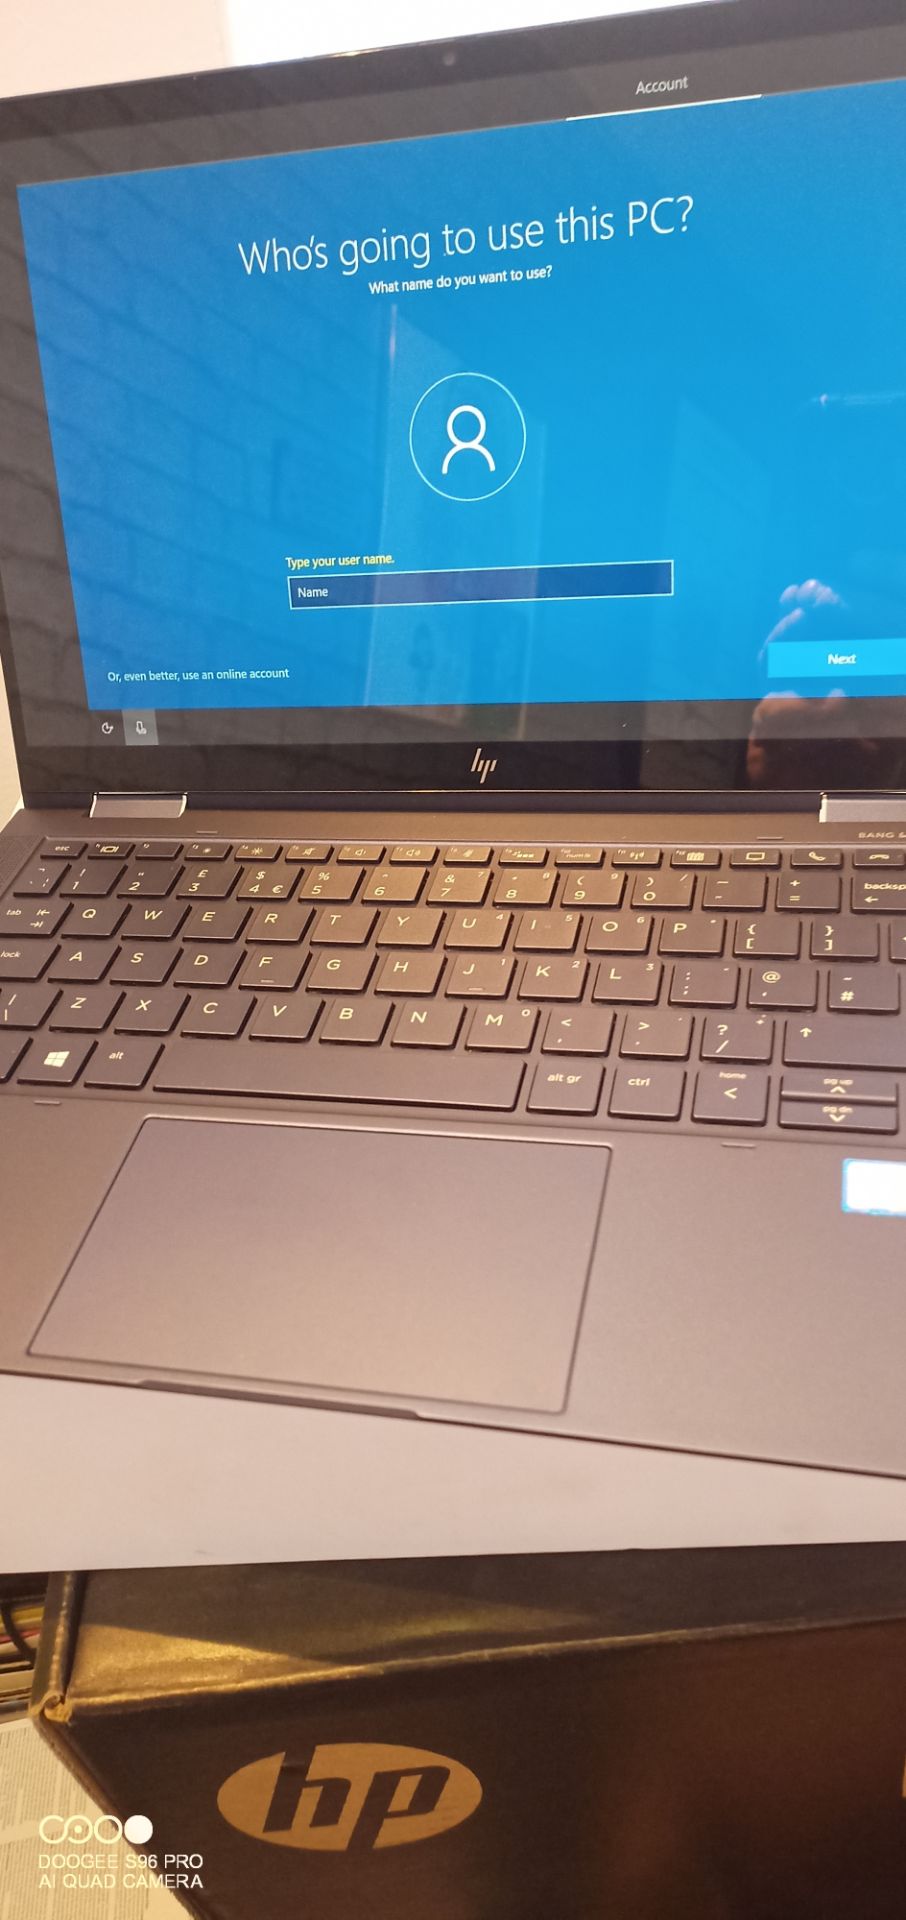 Asus Zenbook Laptop - Looks to be first person set up - complete with all accessories - Image 2 of 8